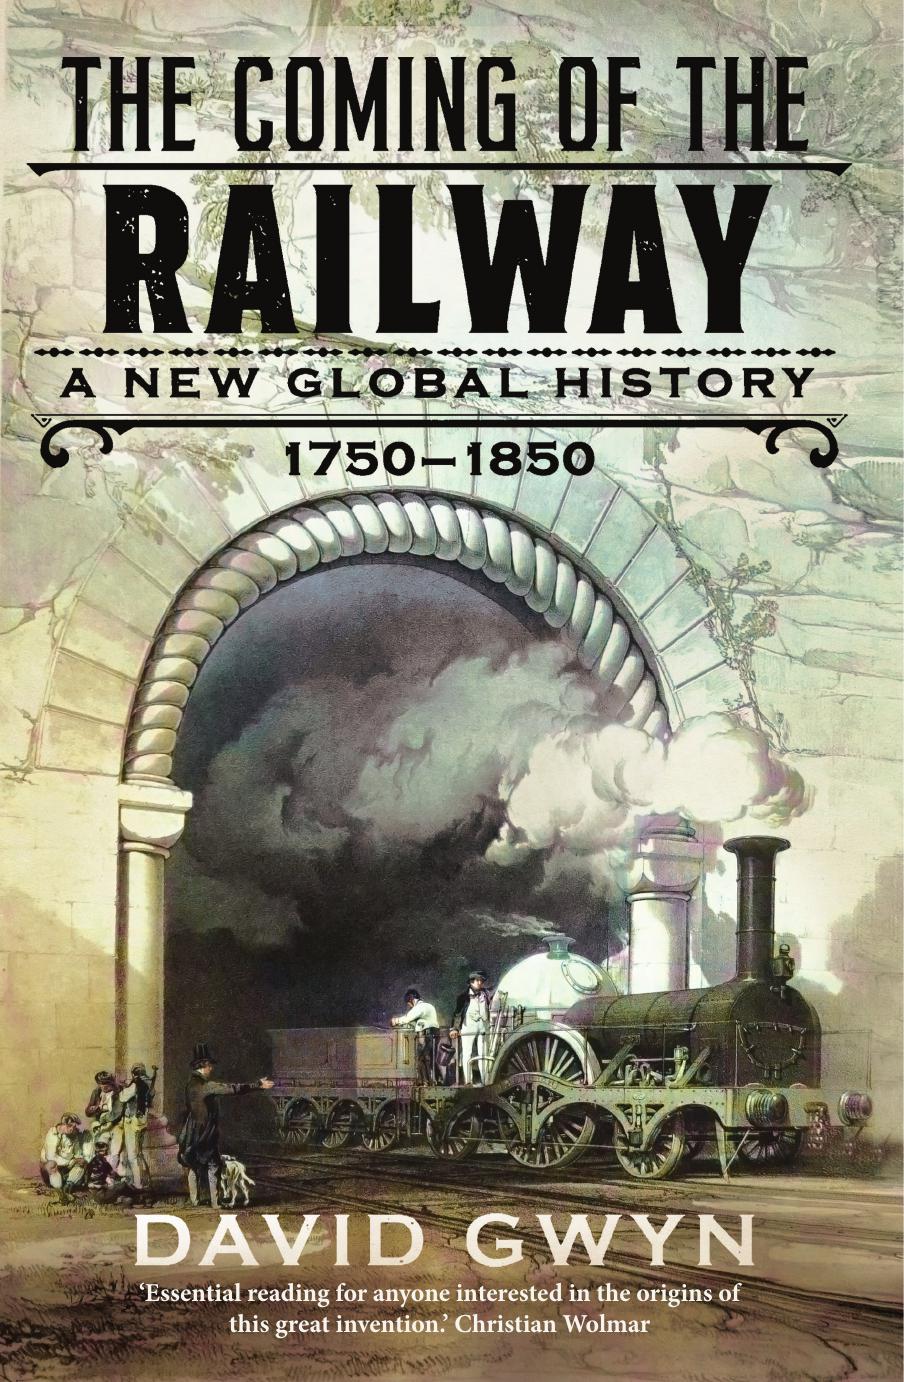 The Coming of the Railway: A New Global History, 1750-1850 by David Gwyn